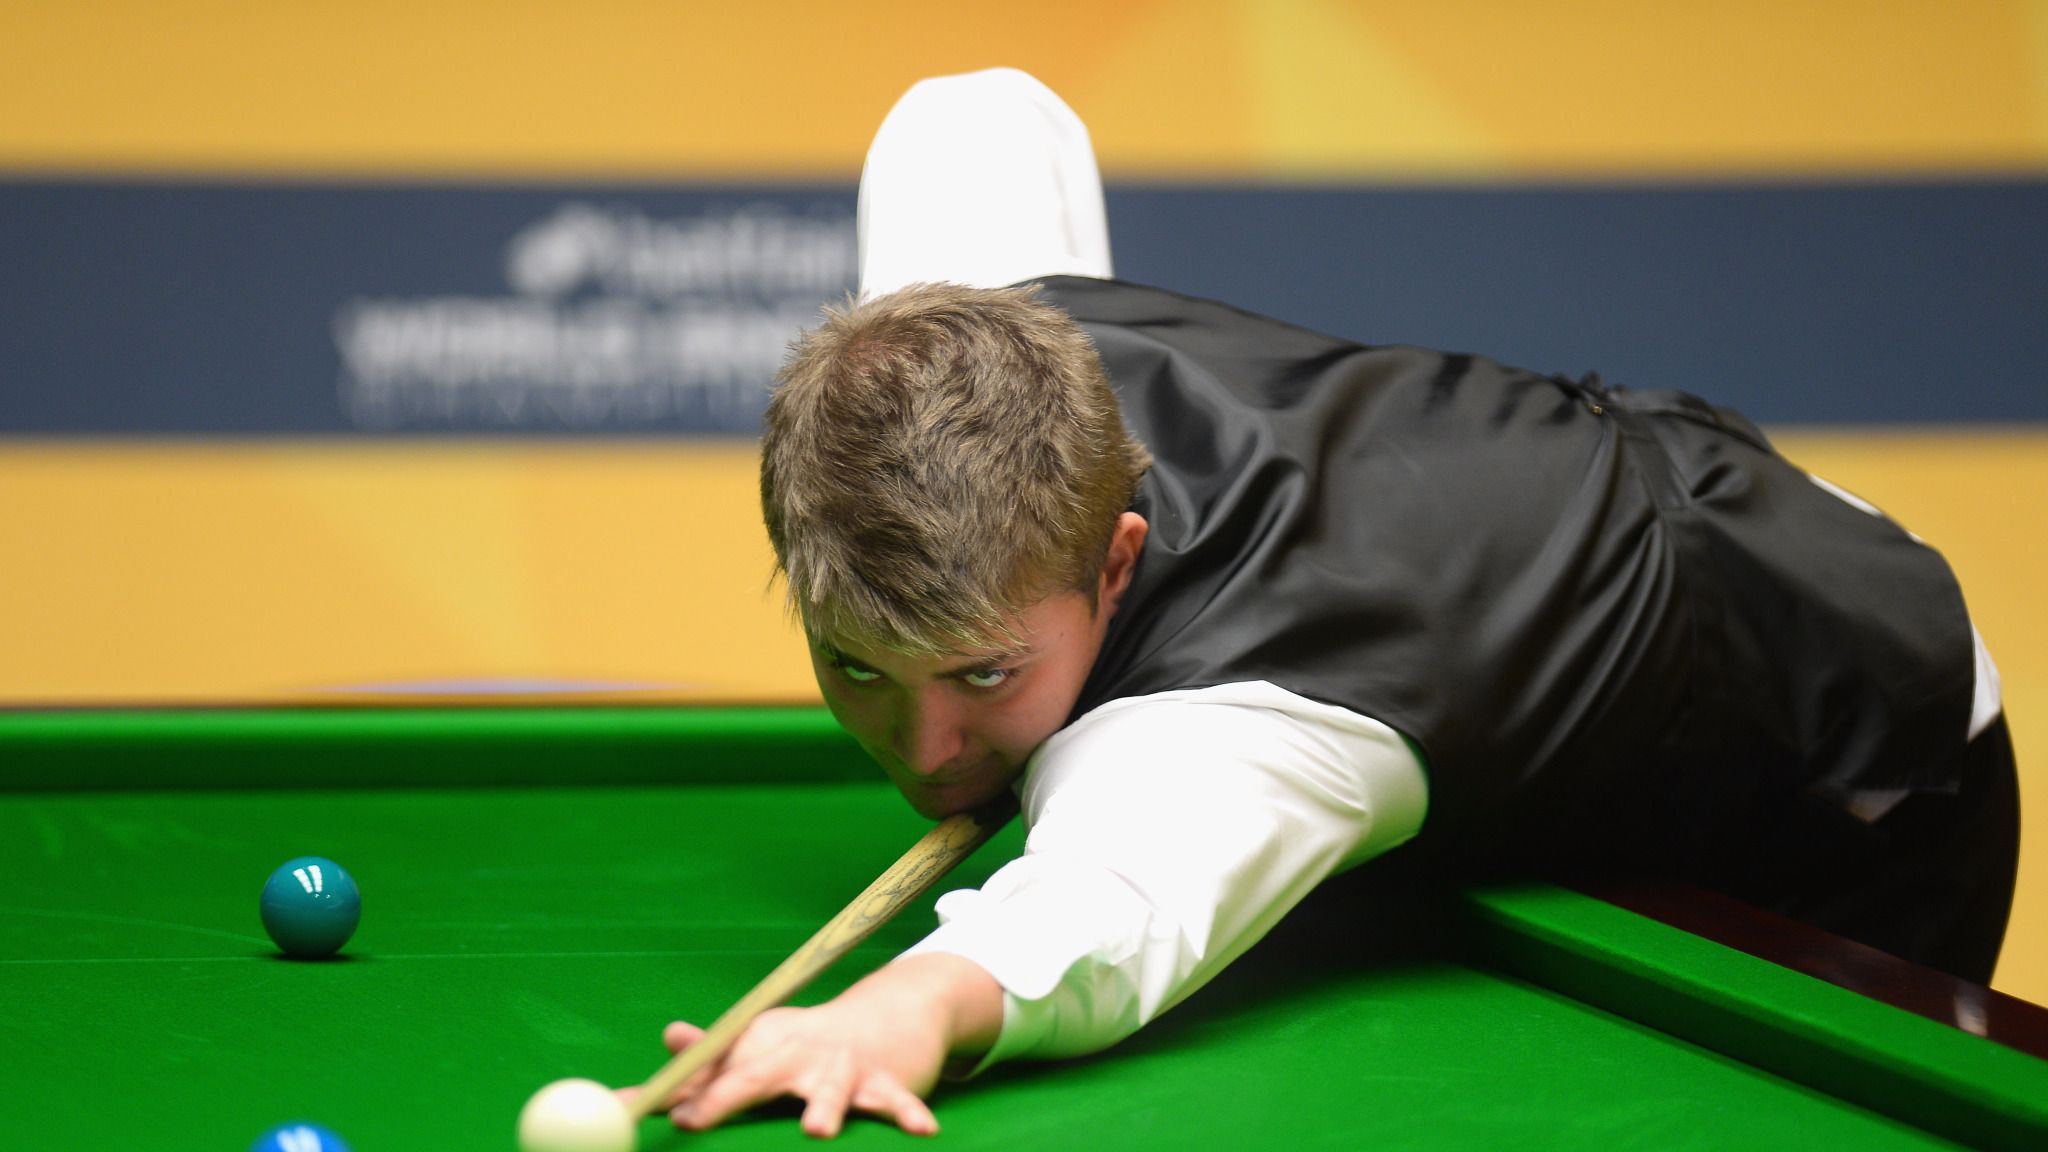 Michael White beat Xiao Guodong with just six seconds remaining in their Snooker Shoot-Out match Snooker News Sky Sports